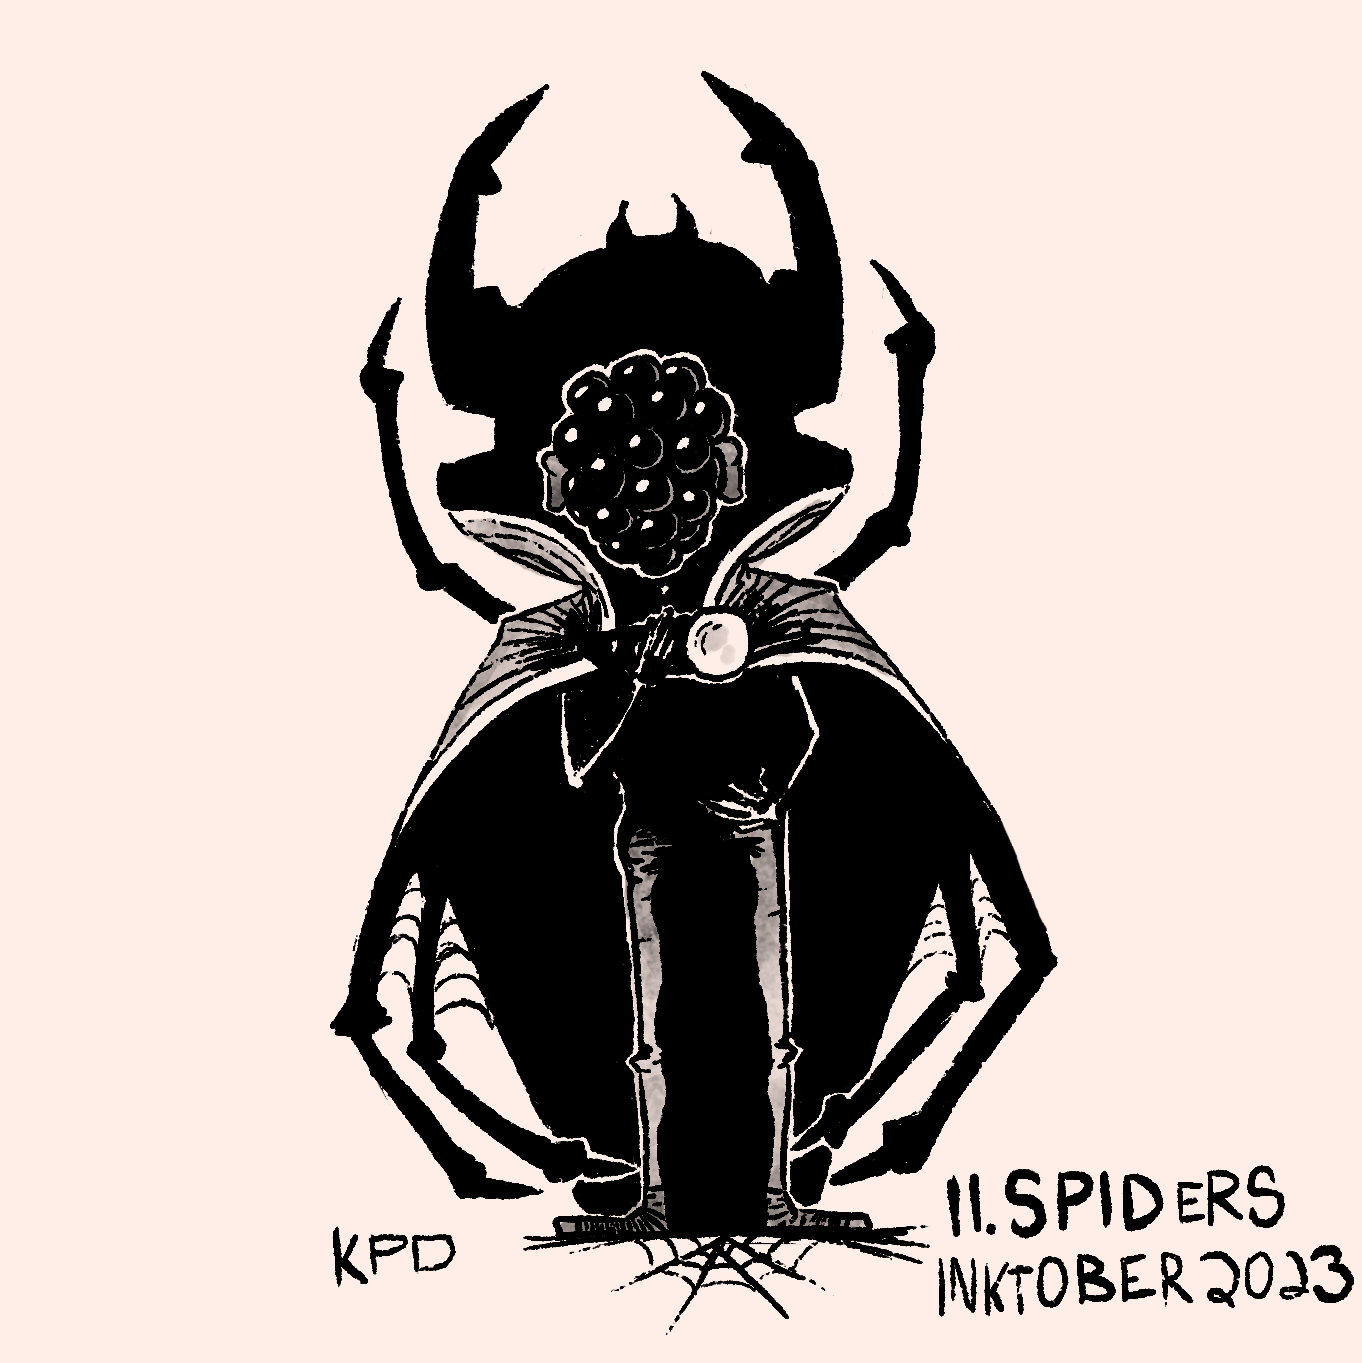 002 - spiders